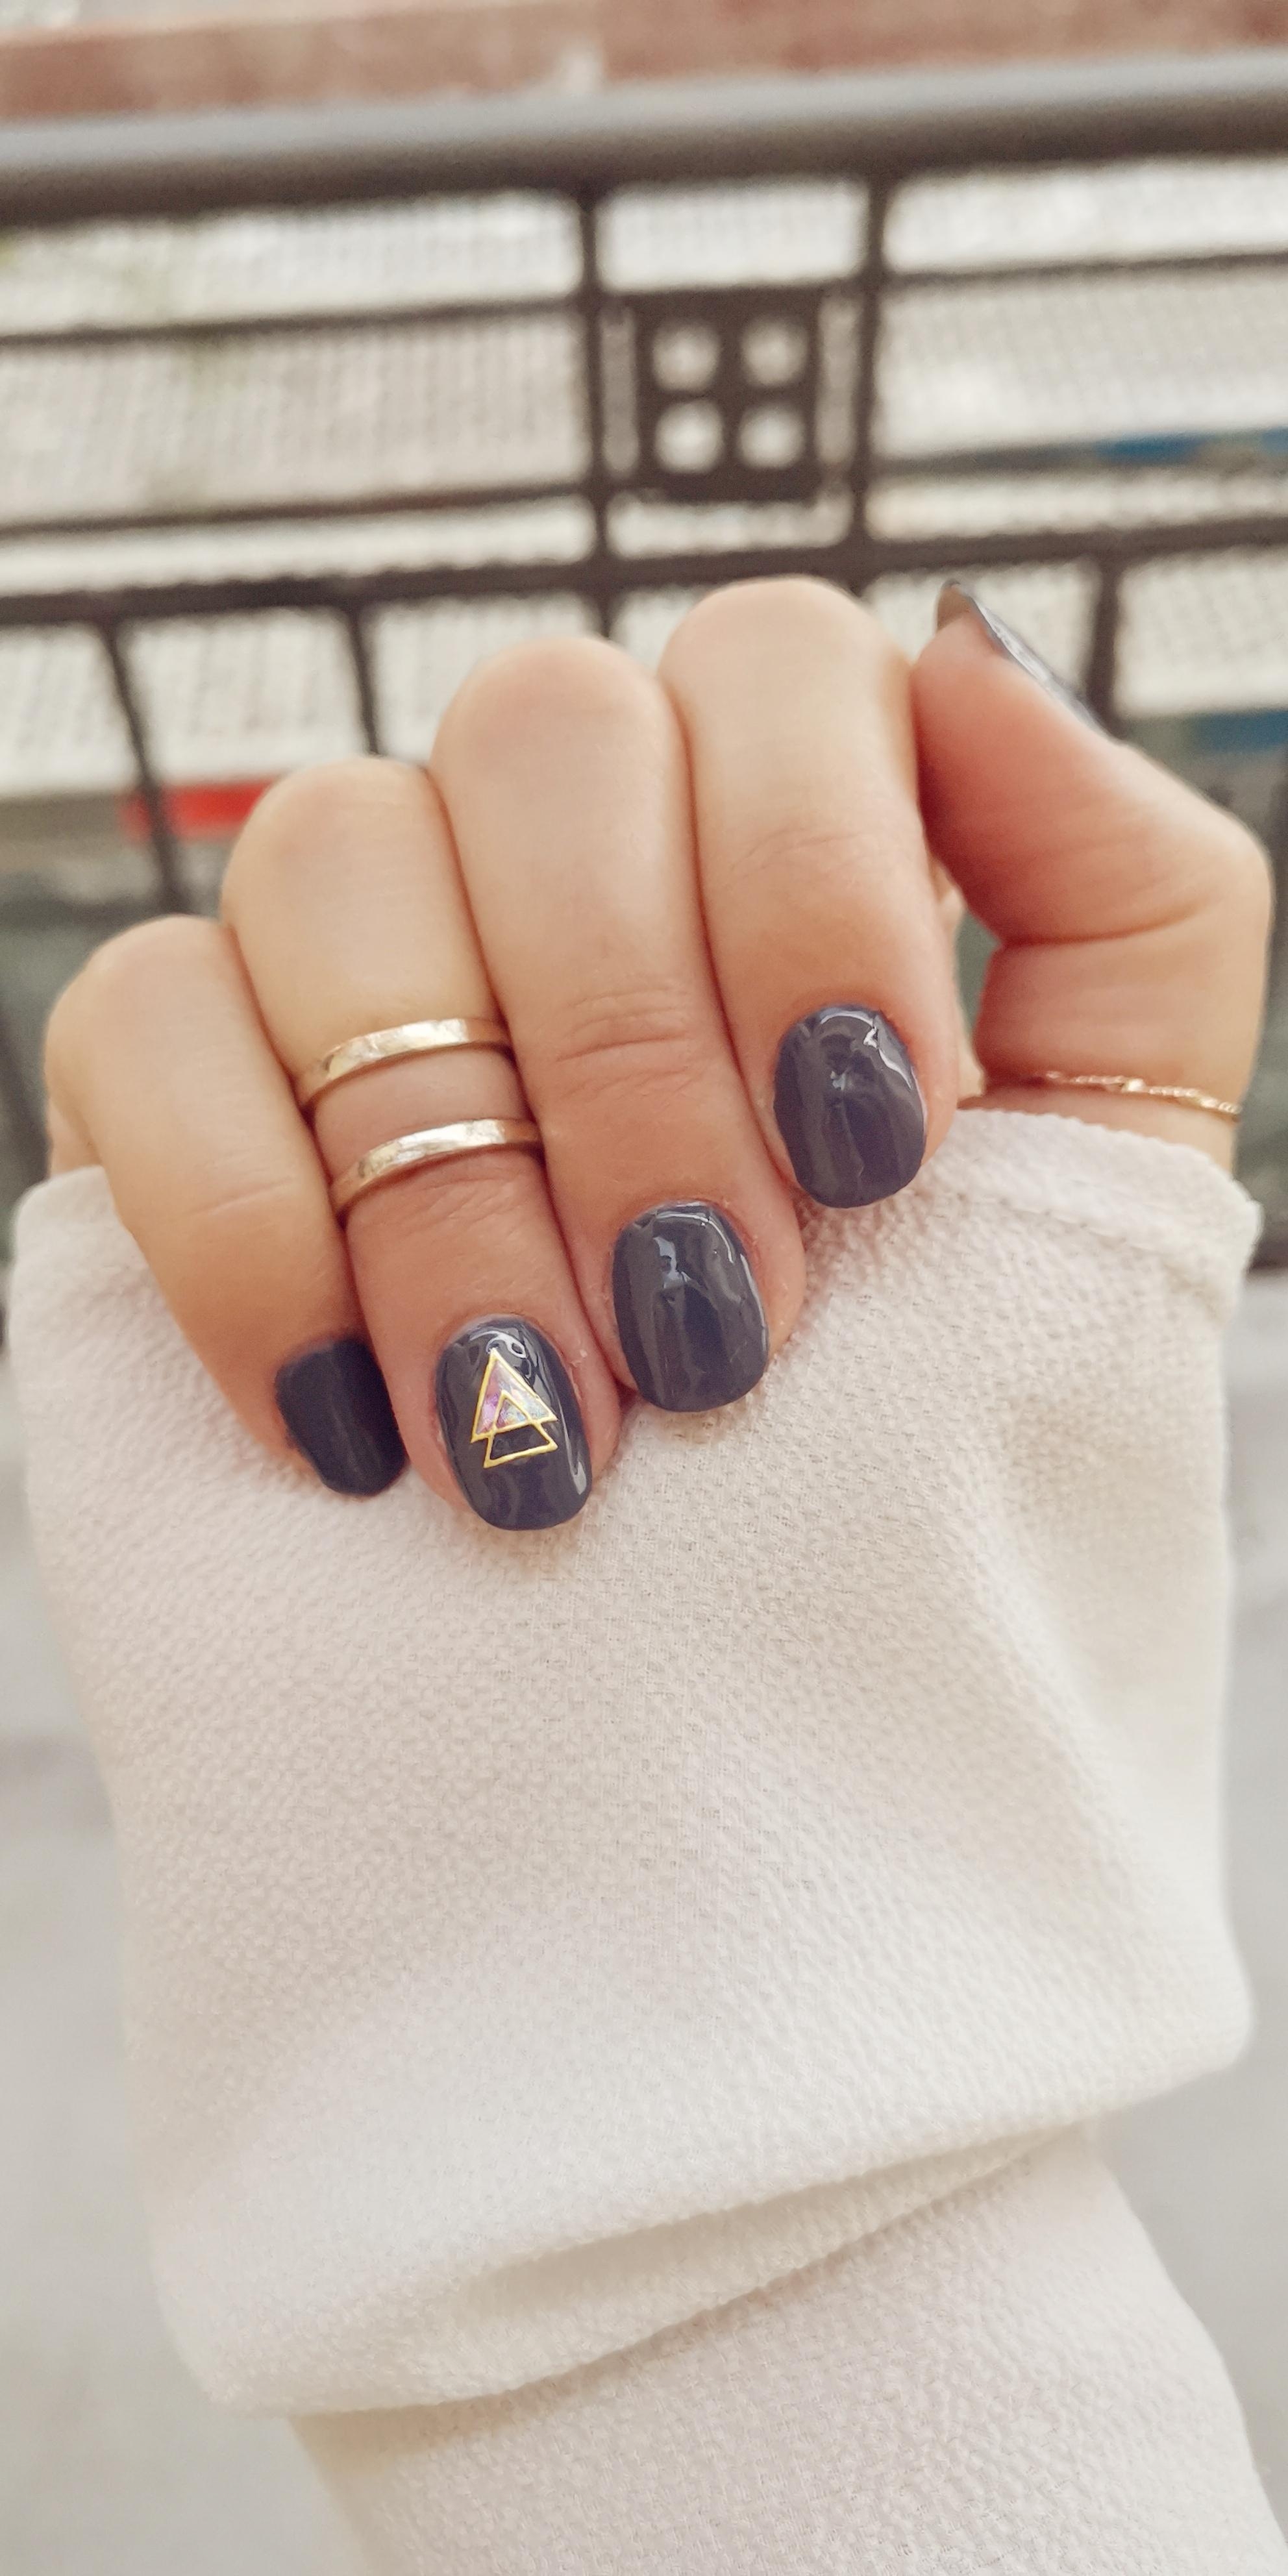 Starting the week with a fresh #manimonday #nailart